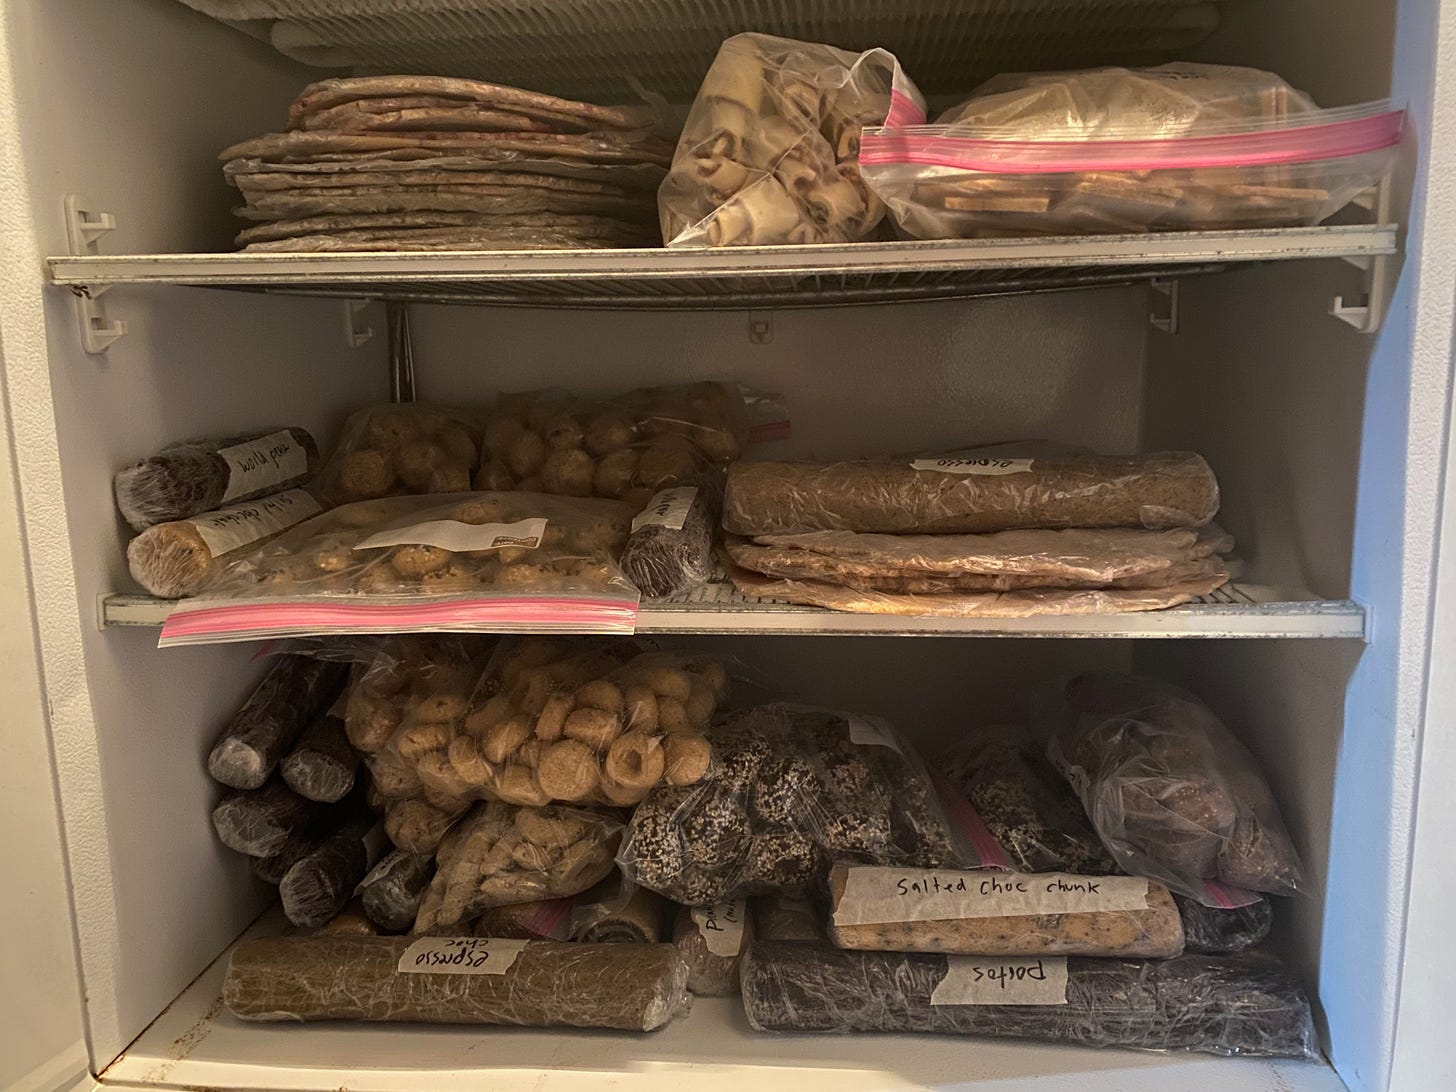 View into a full freezer. Three shelves hold many doughs in the above forms: a stack of rolled out sheets of dough, many dough logs, ziplock of cut out cookies, dough balls, rugelach, and thumbprint cookies.